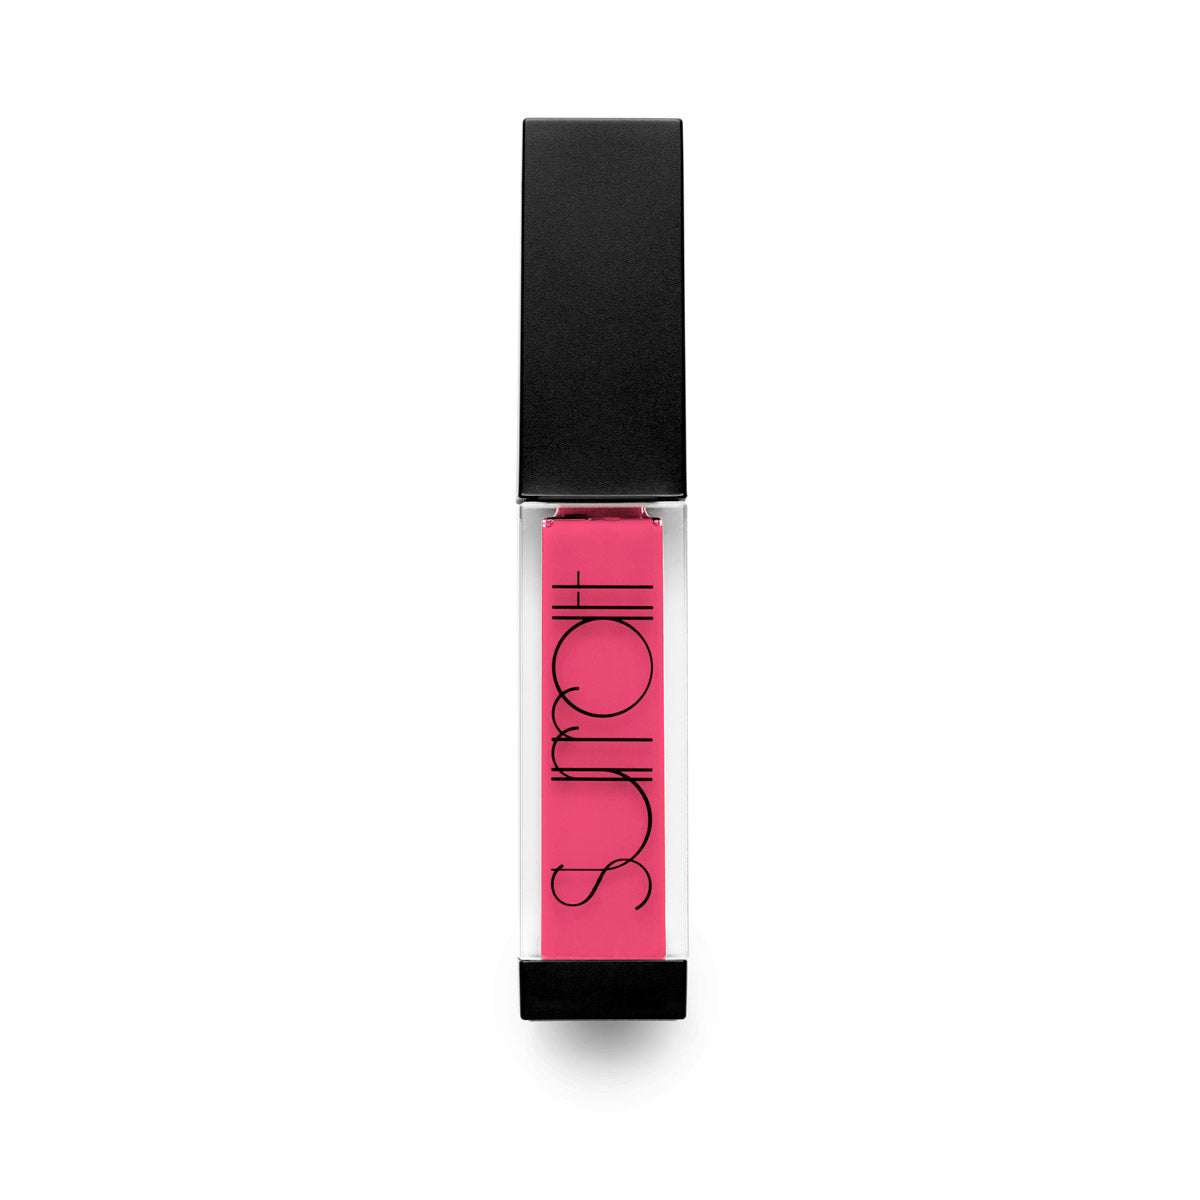 POMPADOUR PINK - BRIGHT PINK - high shine lip gloss in bright pink shade